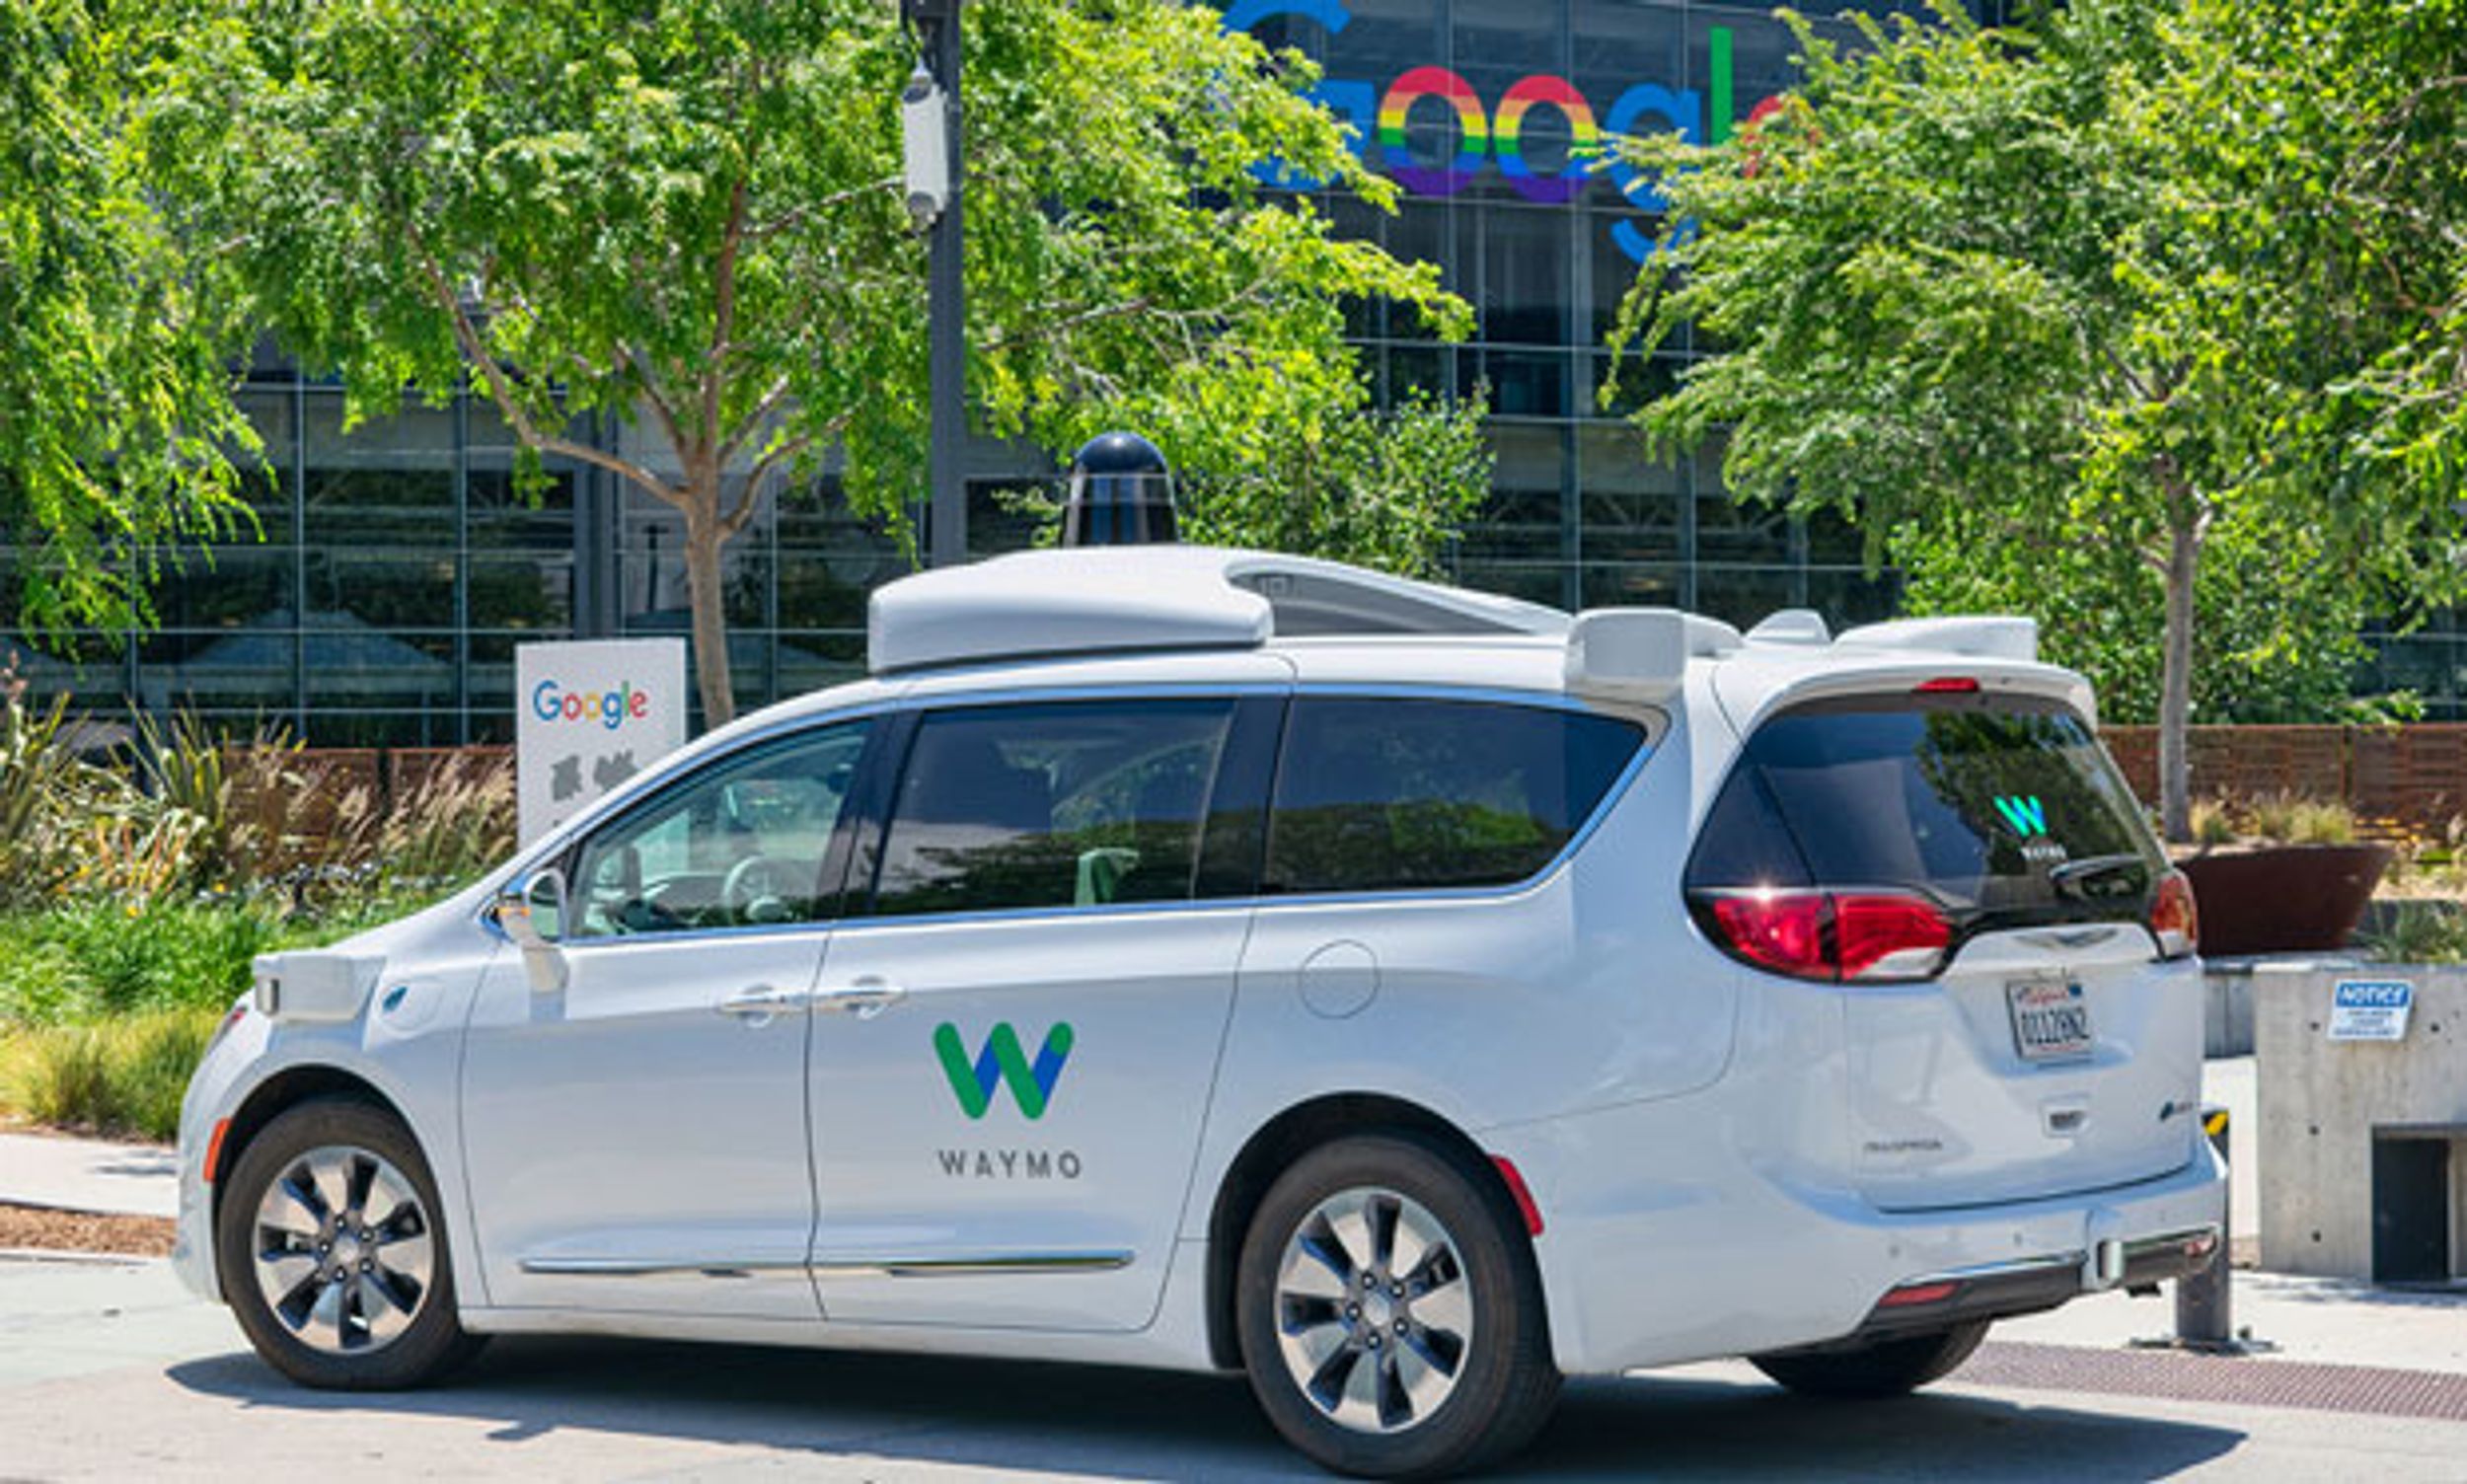 Image of a Waymo car in front of the Google sign